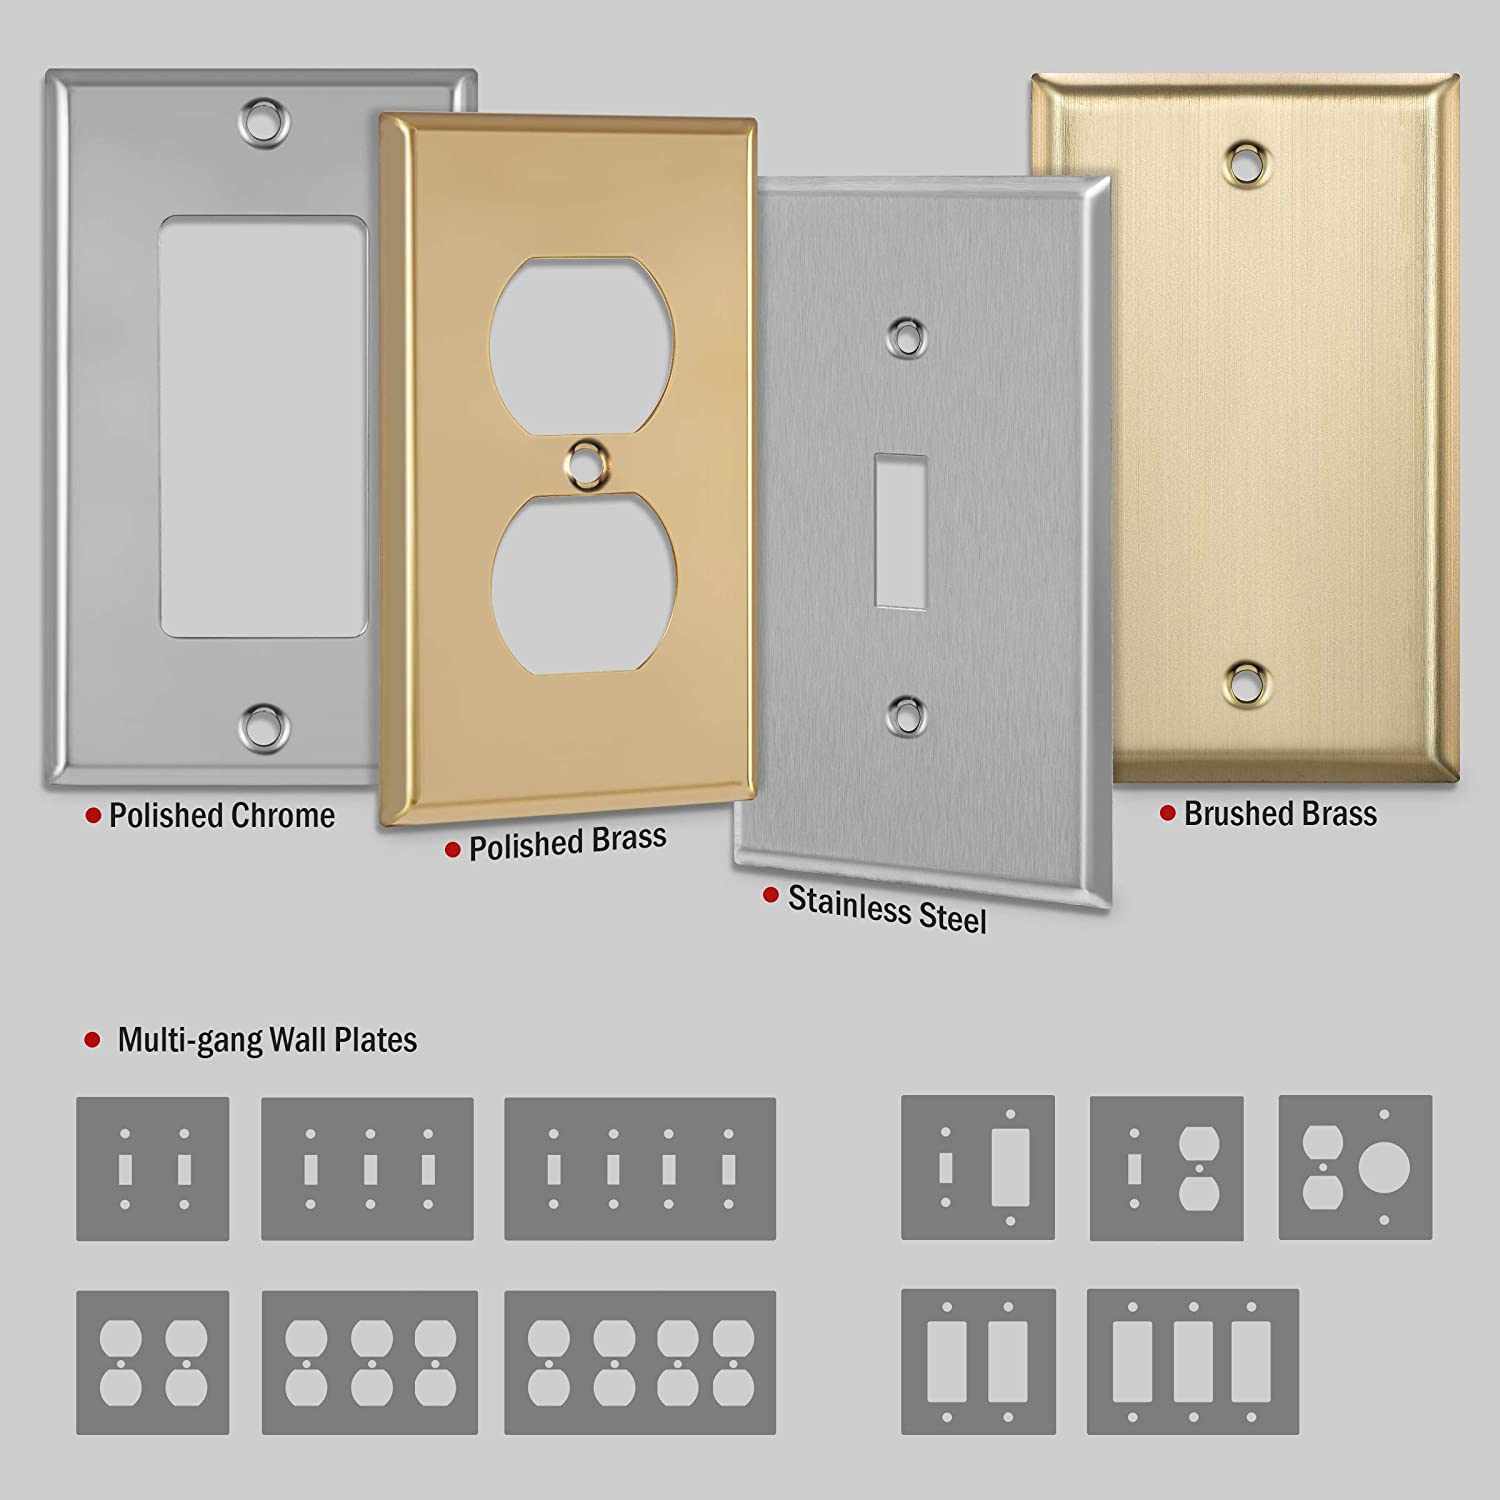 NEW 2-Gang Standard Duplex Outlet Brushed Stainless Steel Wall Plate 1 pc 